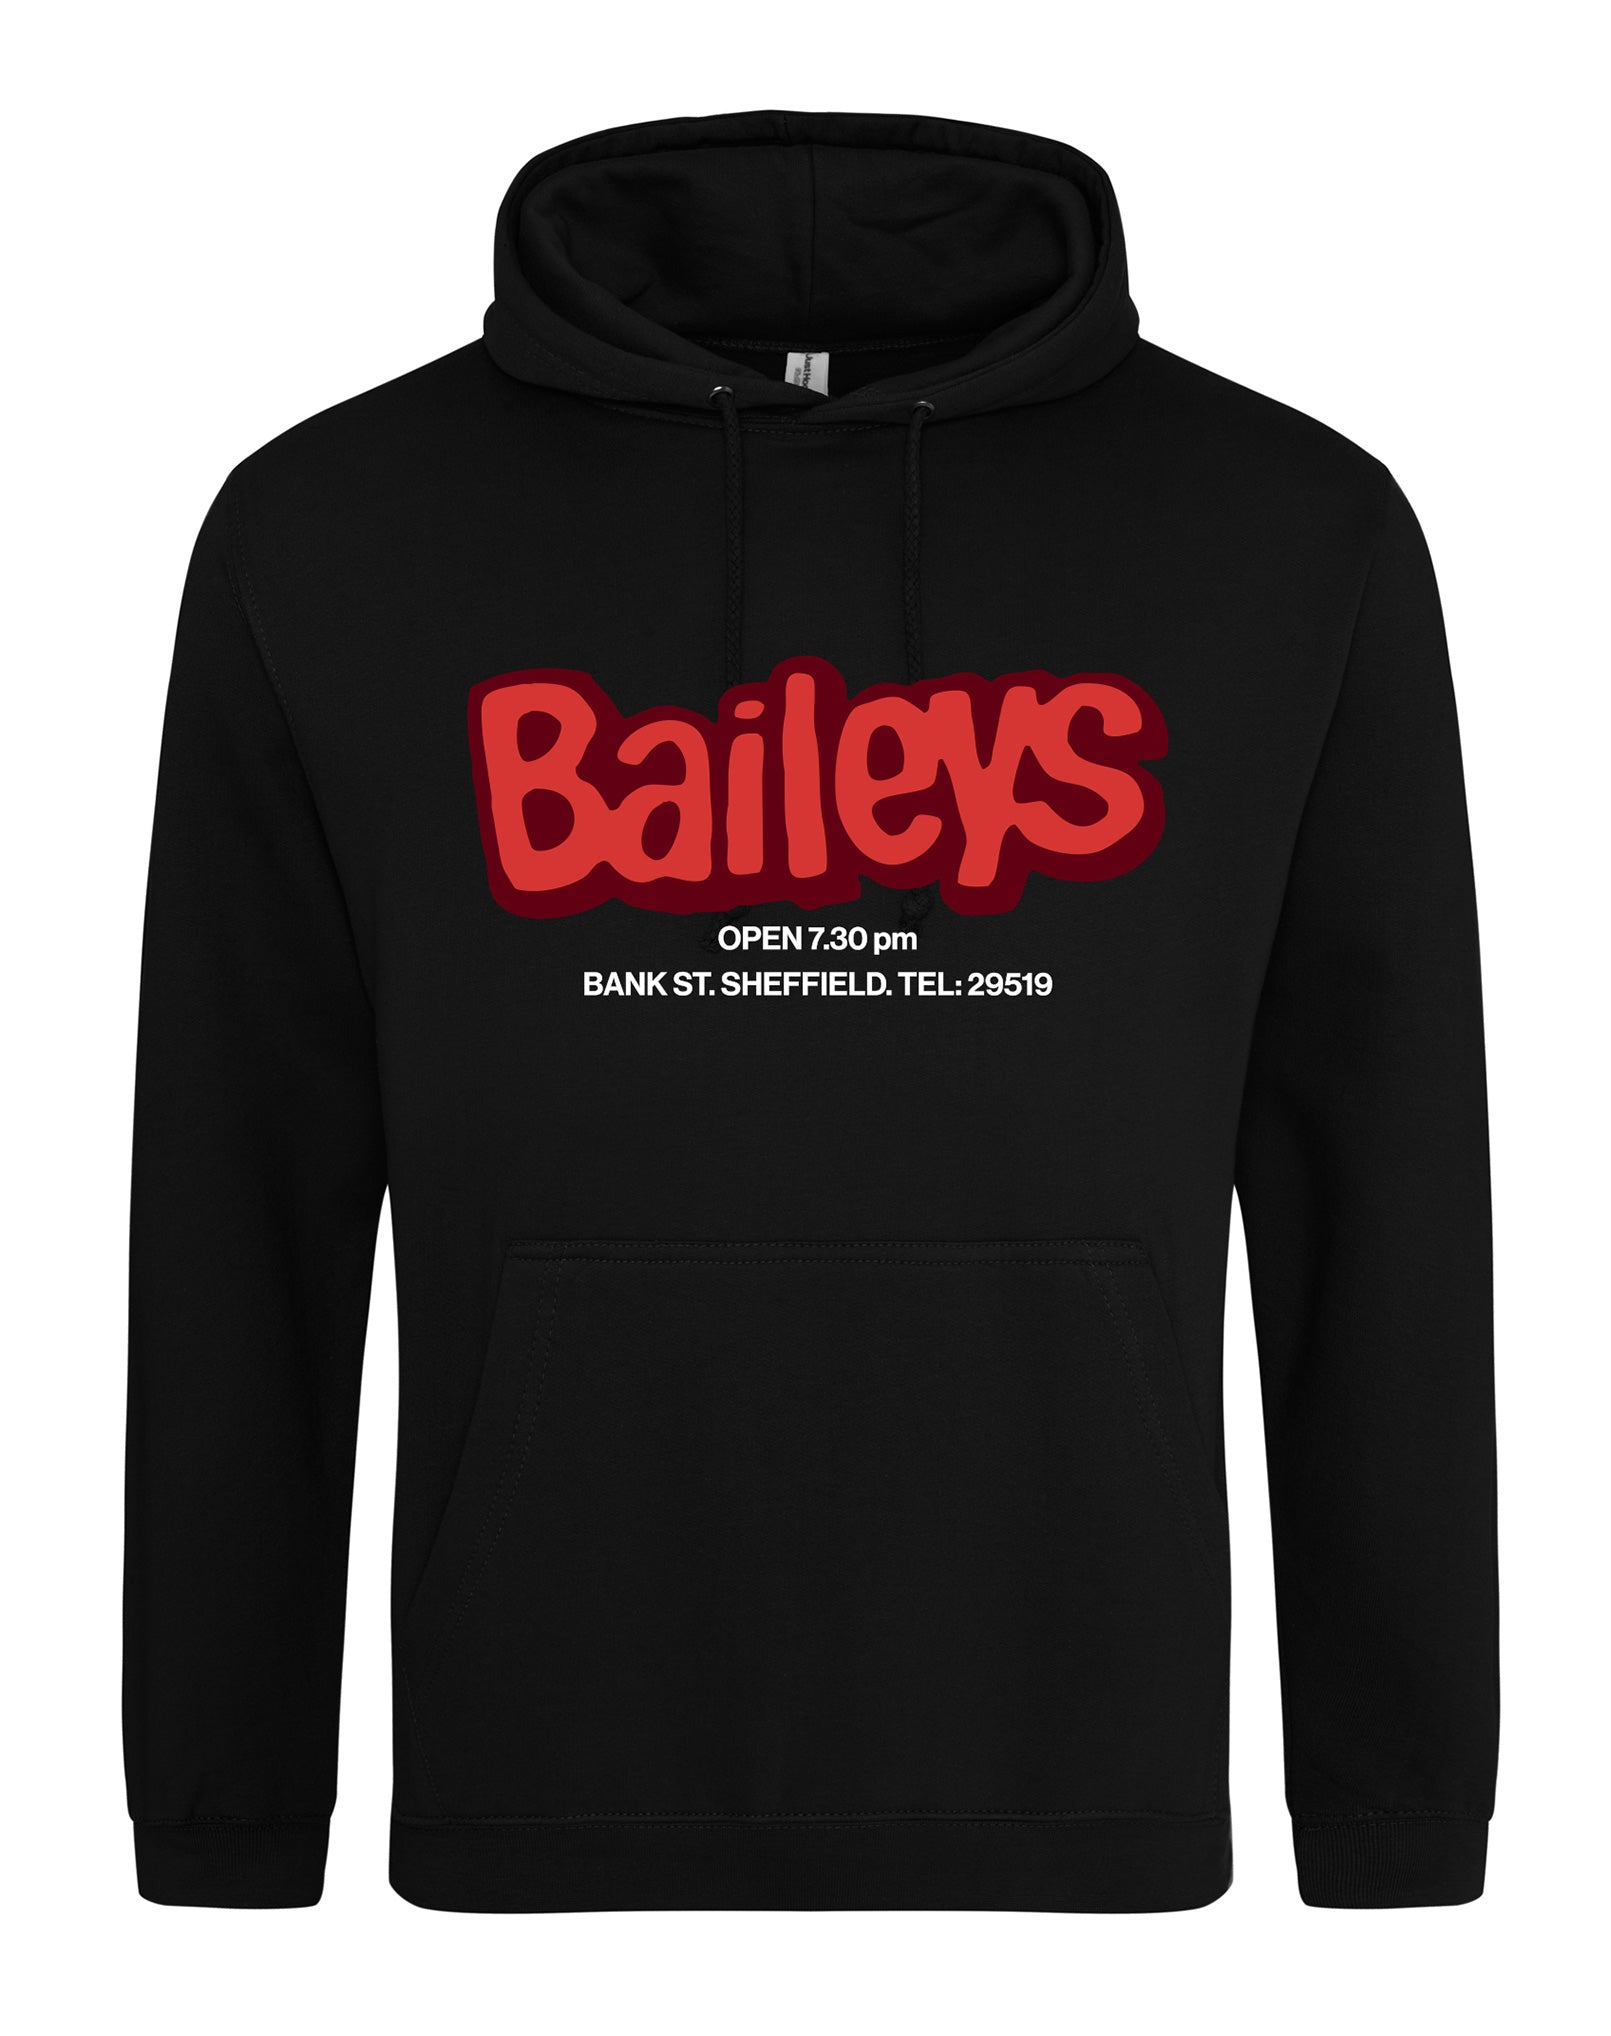 Baileys unisex fit hoodie - various colours - Dirty Stop Outs